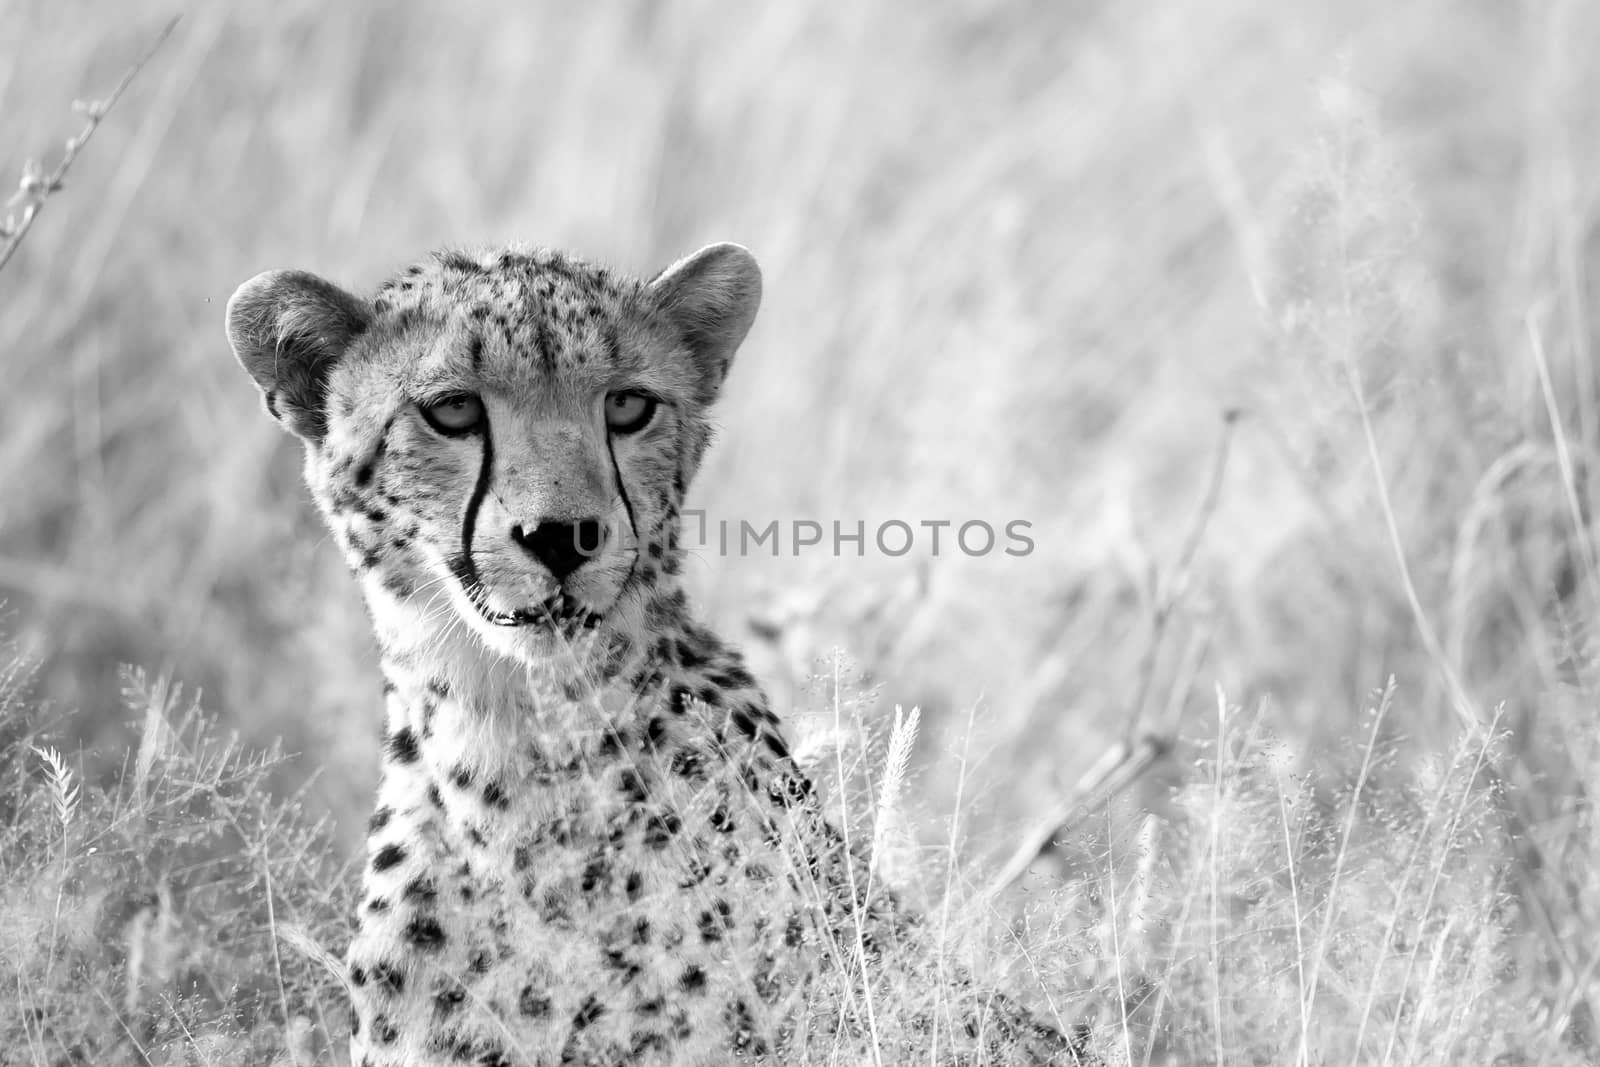 One portrait of a cheetah in the grass landscape